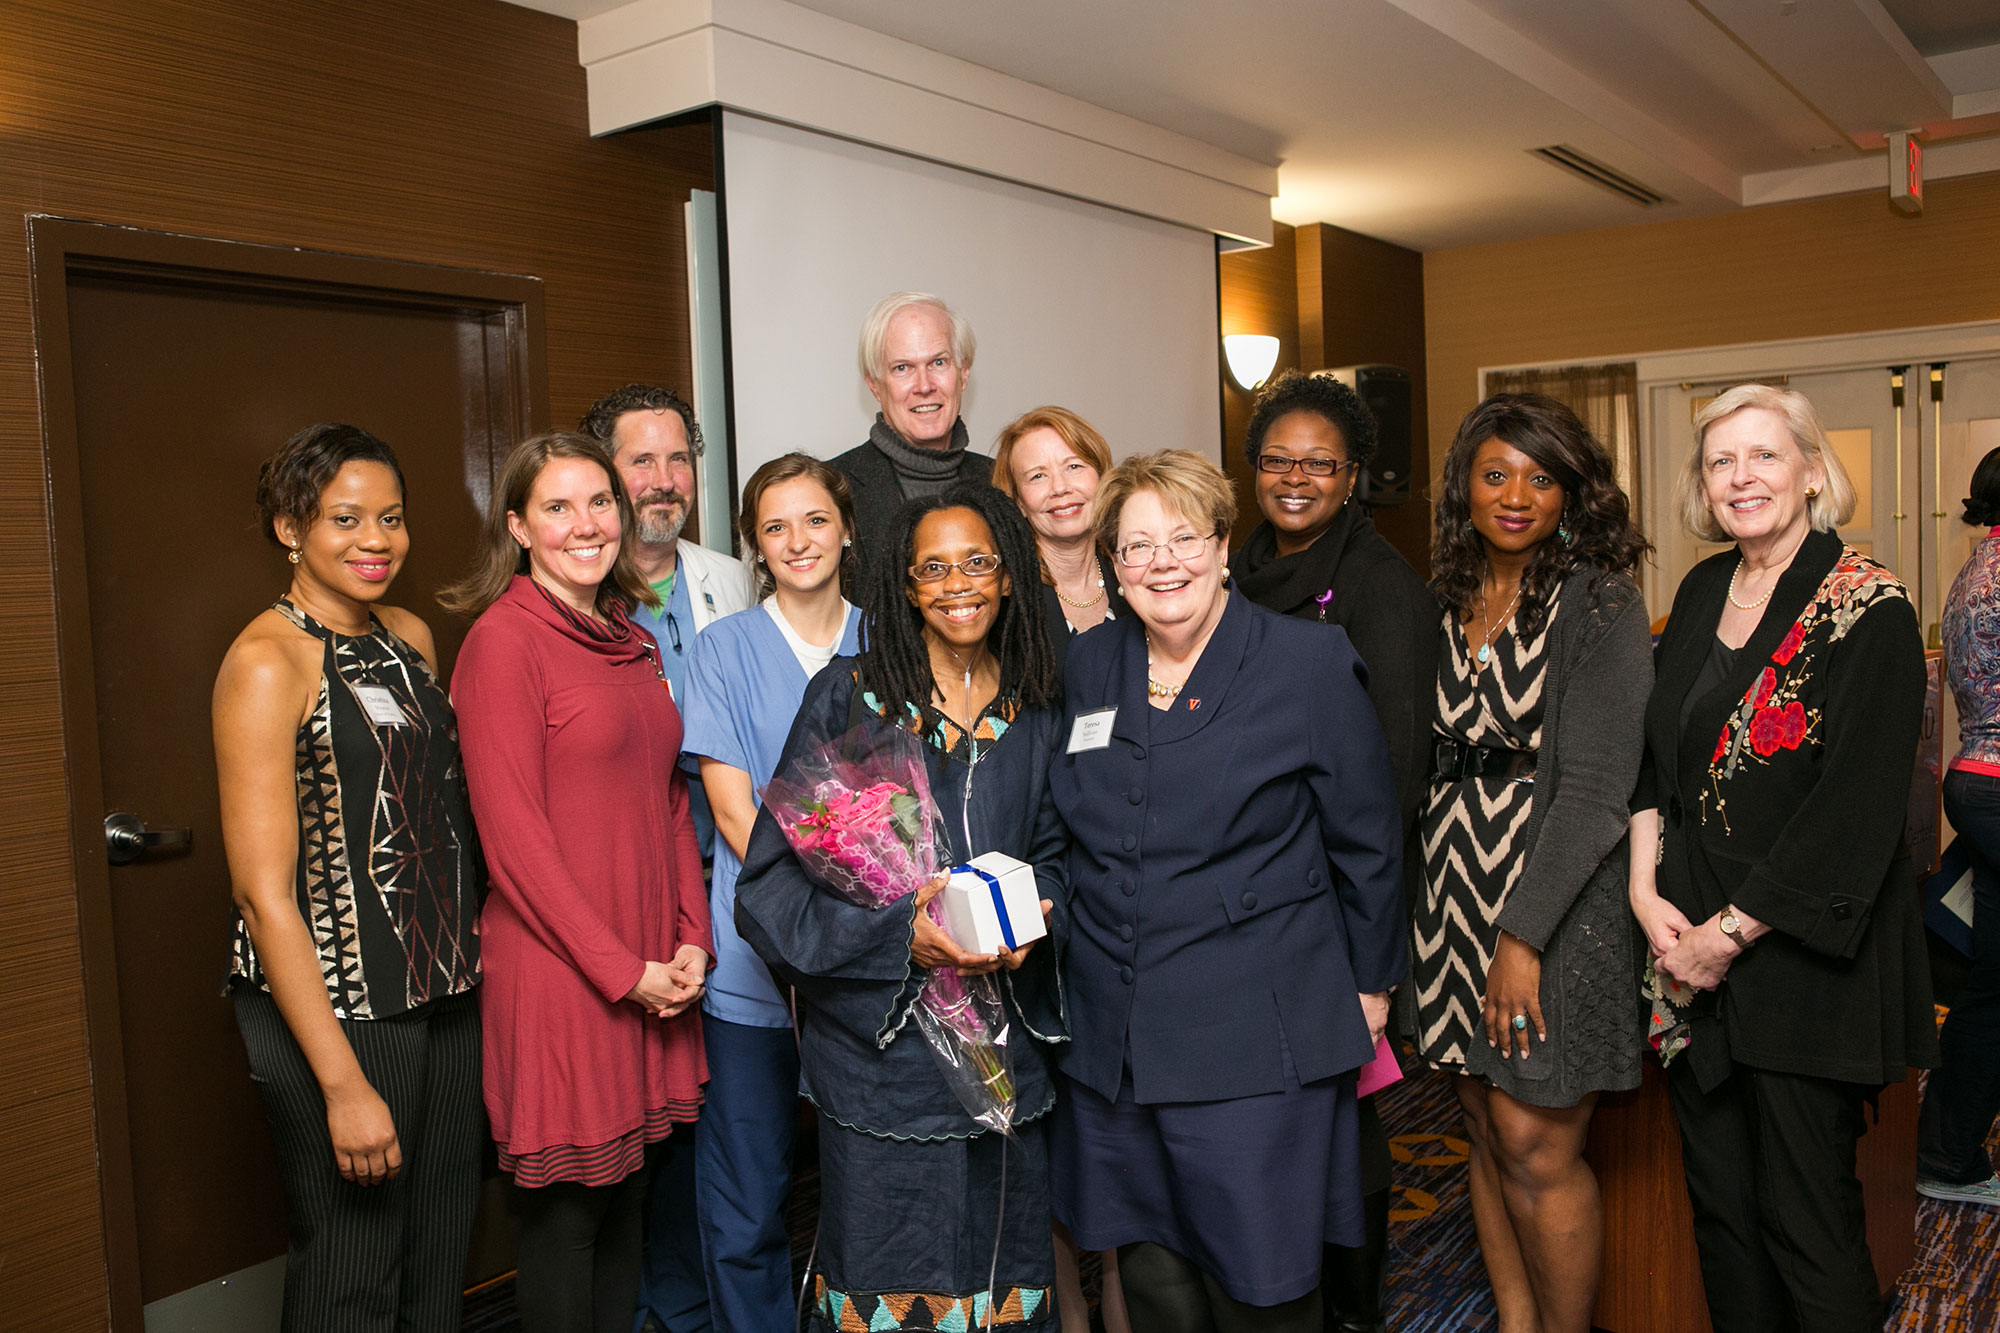 Nursing Ph.D. student Holly Edwards, front left, stands with UVA President Teresa A. Sullivan, front right, and colleagues after receiving UVA’s first Excellence in Graduate Diversity Award.